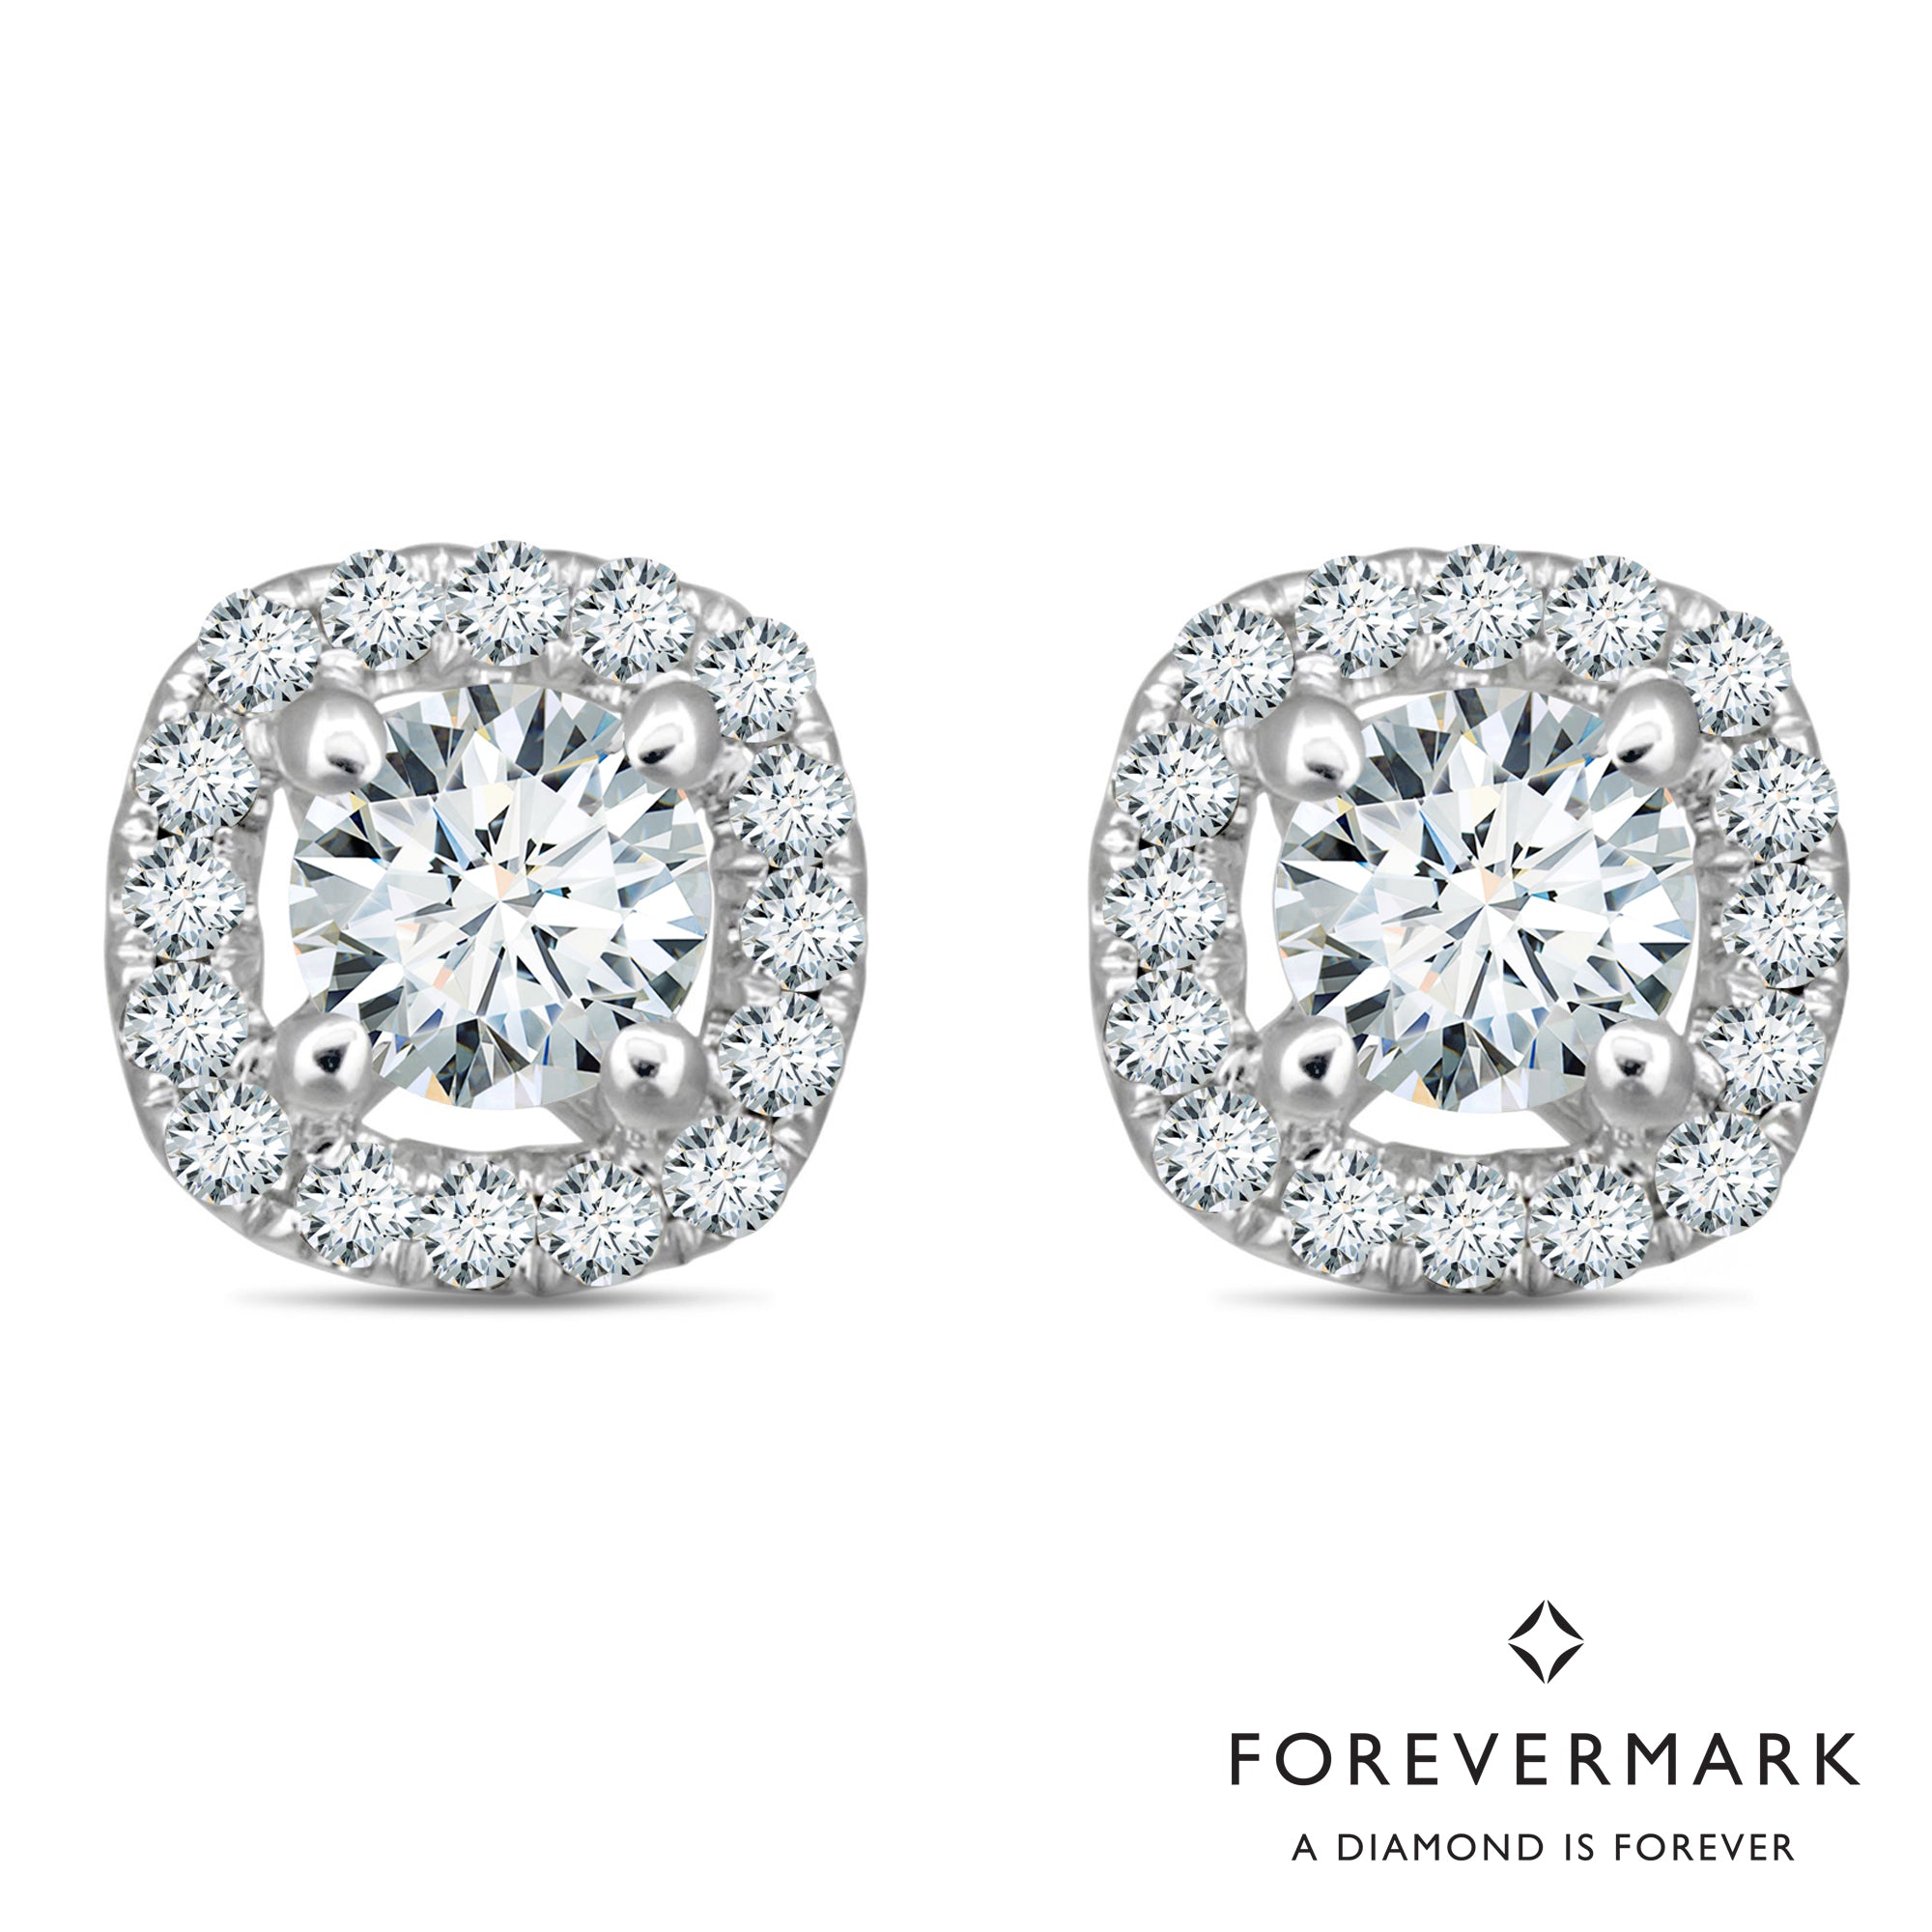 De Beers Forevermark Diamond Cushion Halo Earrings in 18kt White Gold (1/3ct tw)